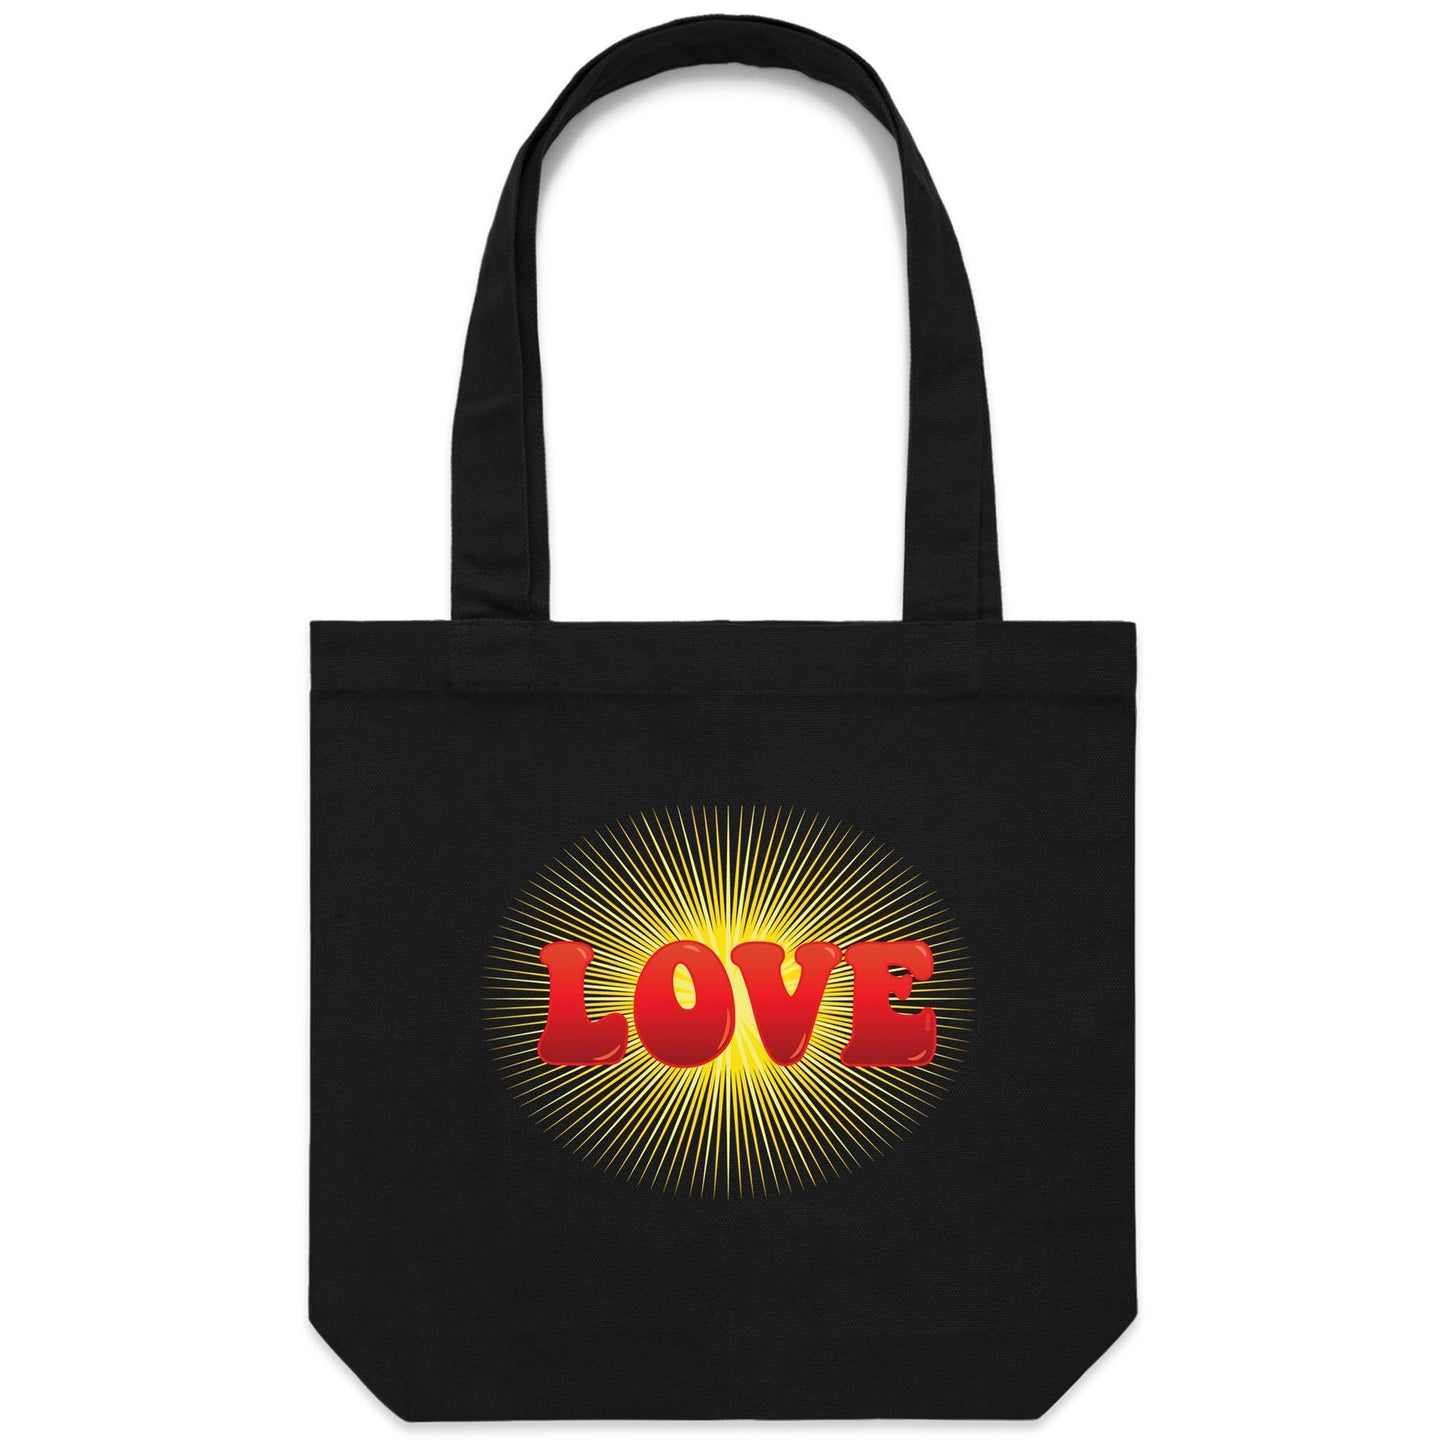 Radiant Love Canvas Totes